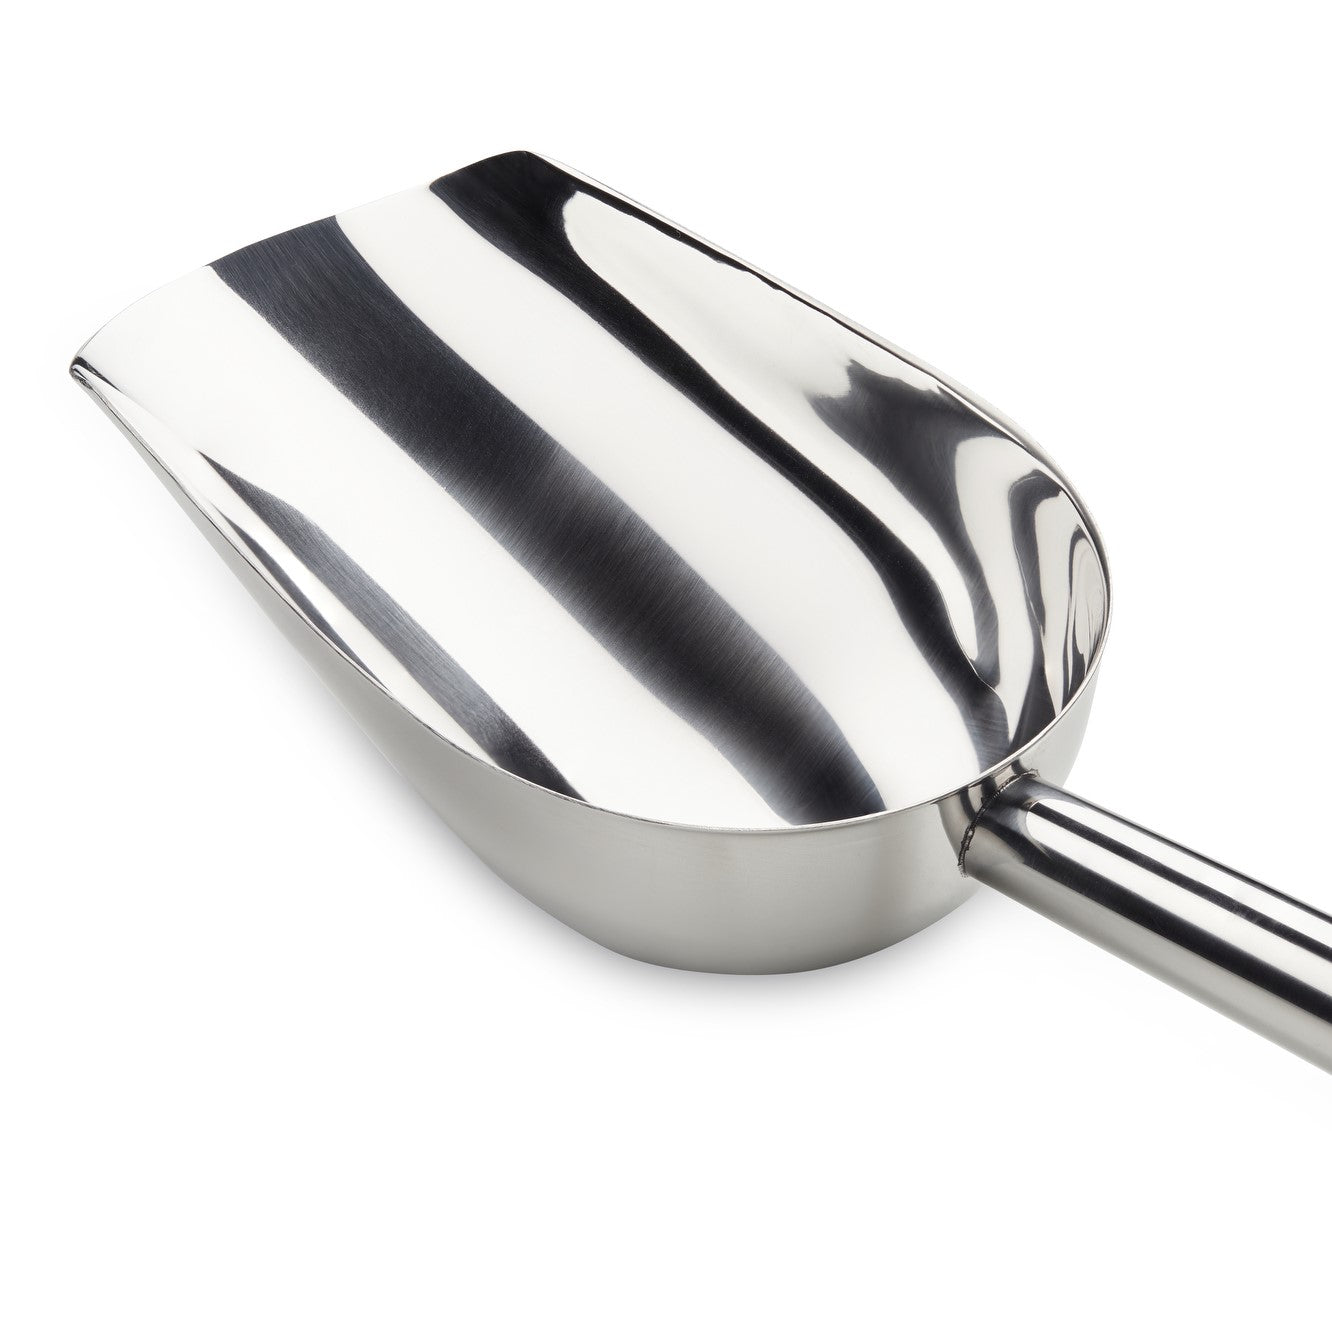 Stainless Steel Utility Ice Scoop -  9.5 Inches